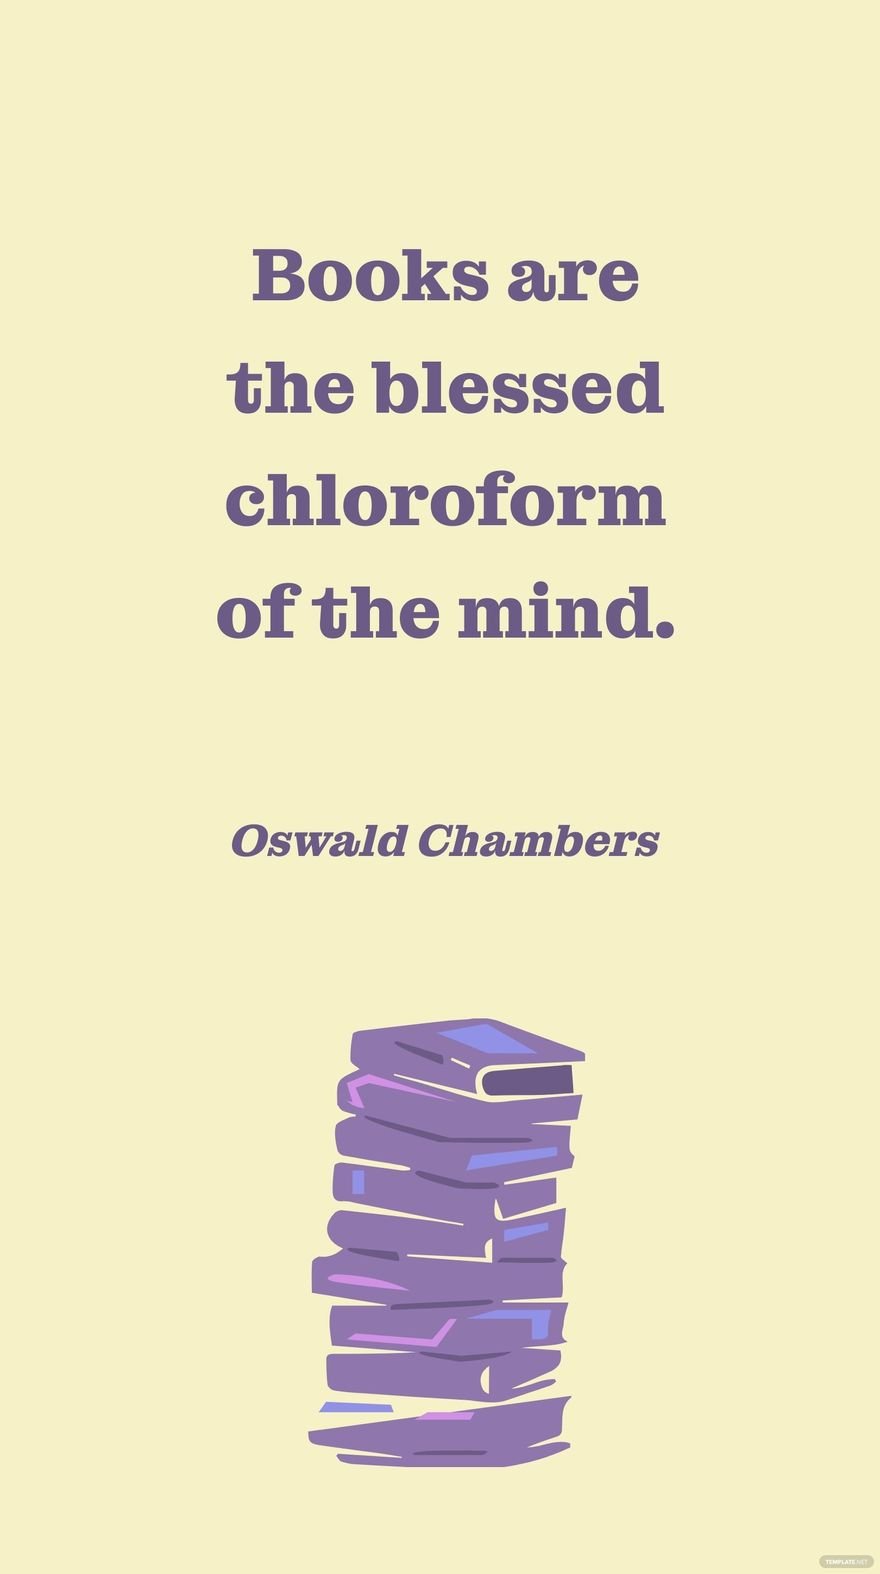 Free Oswald Chambers - Books are the blessed chloroform of the mind.